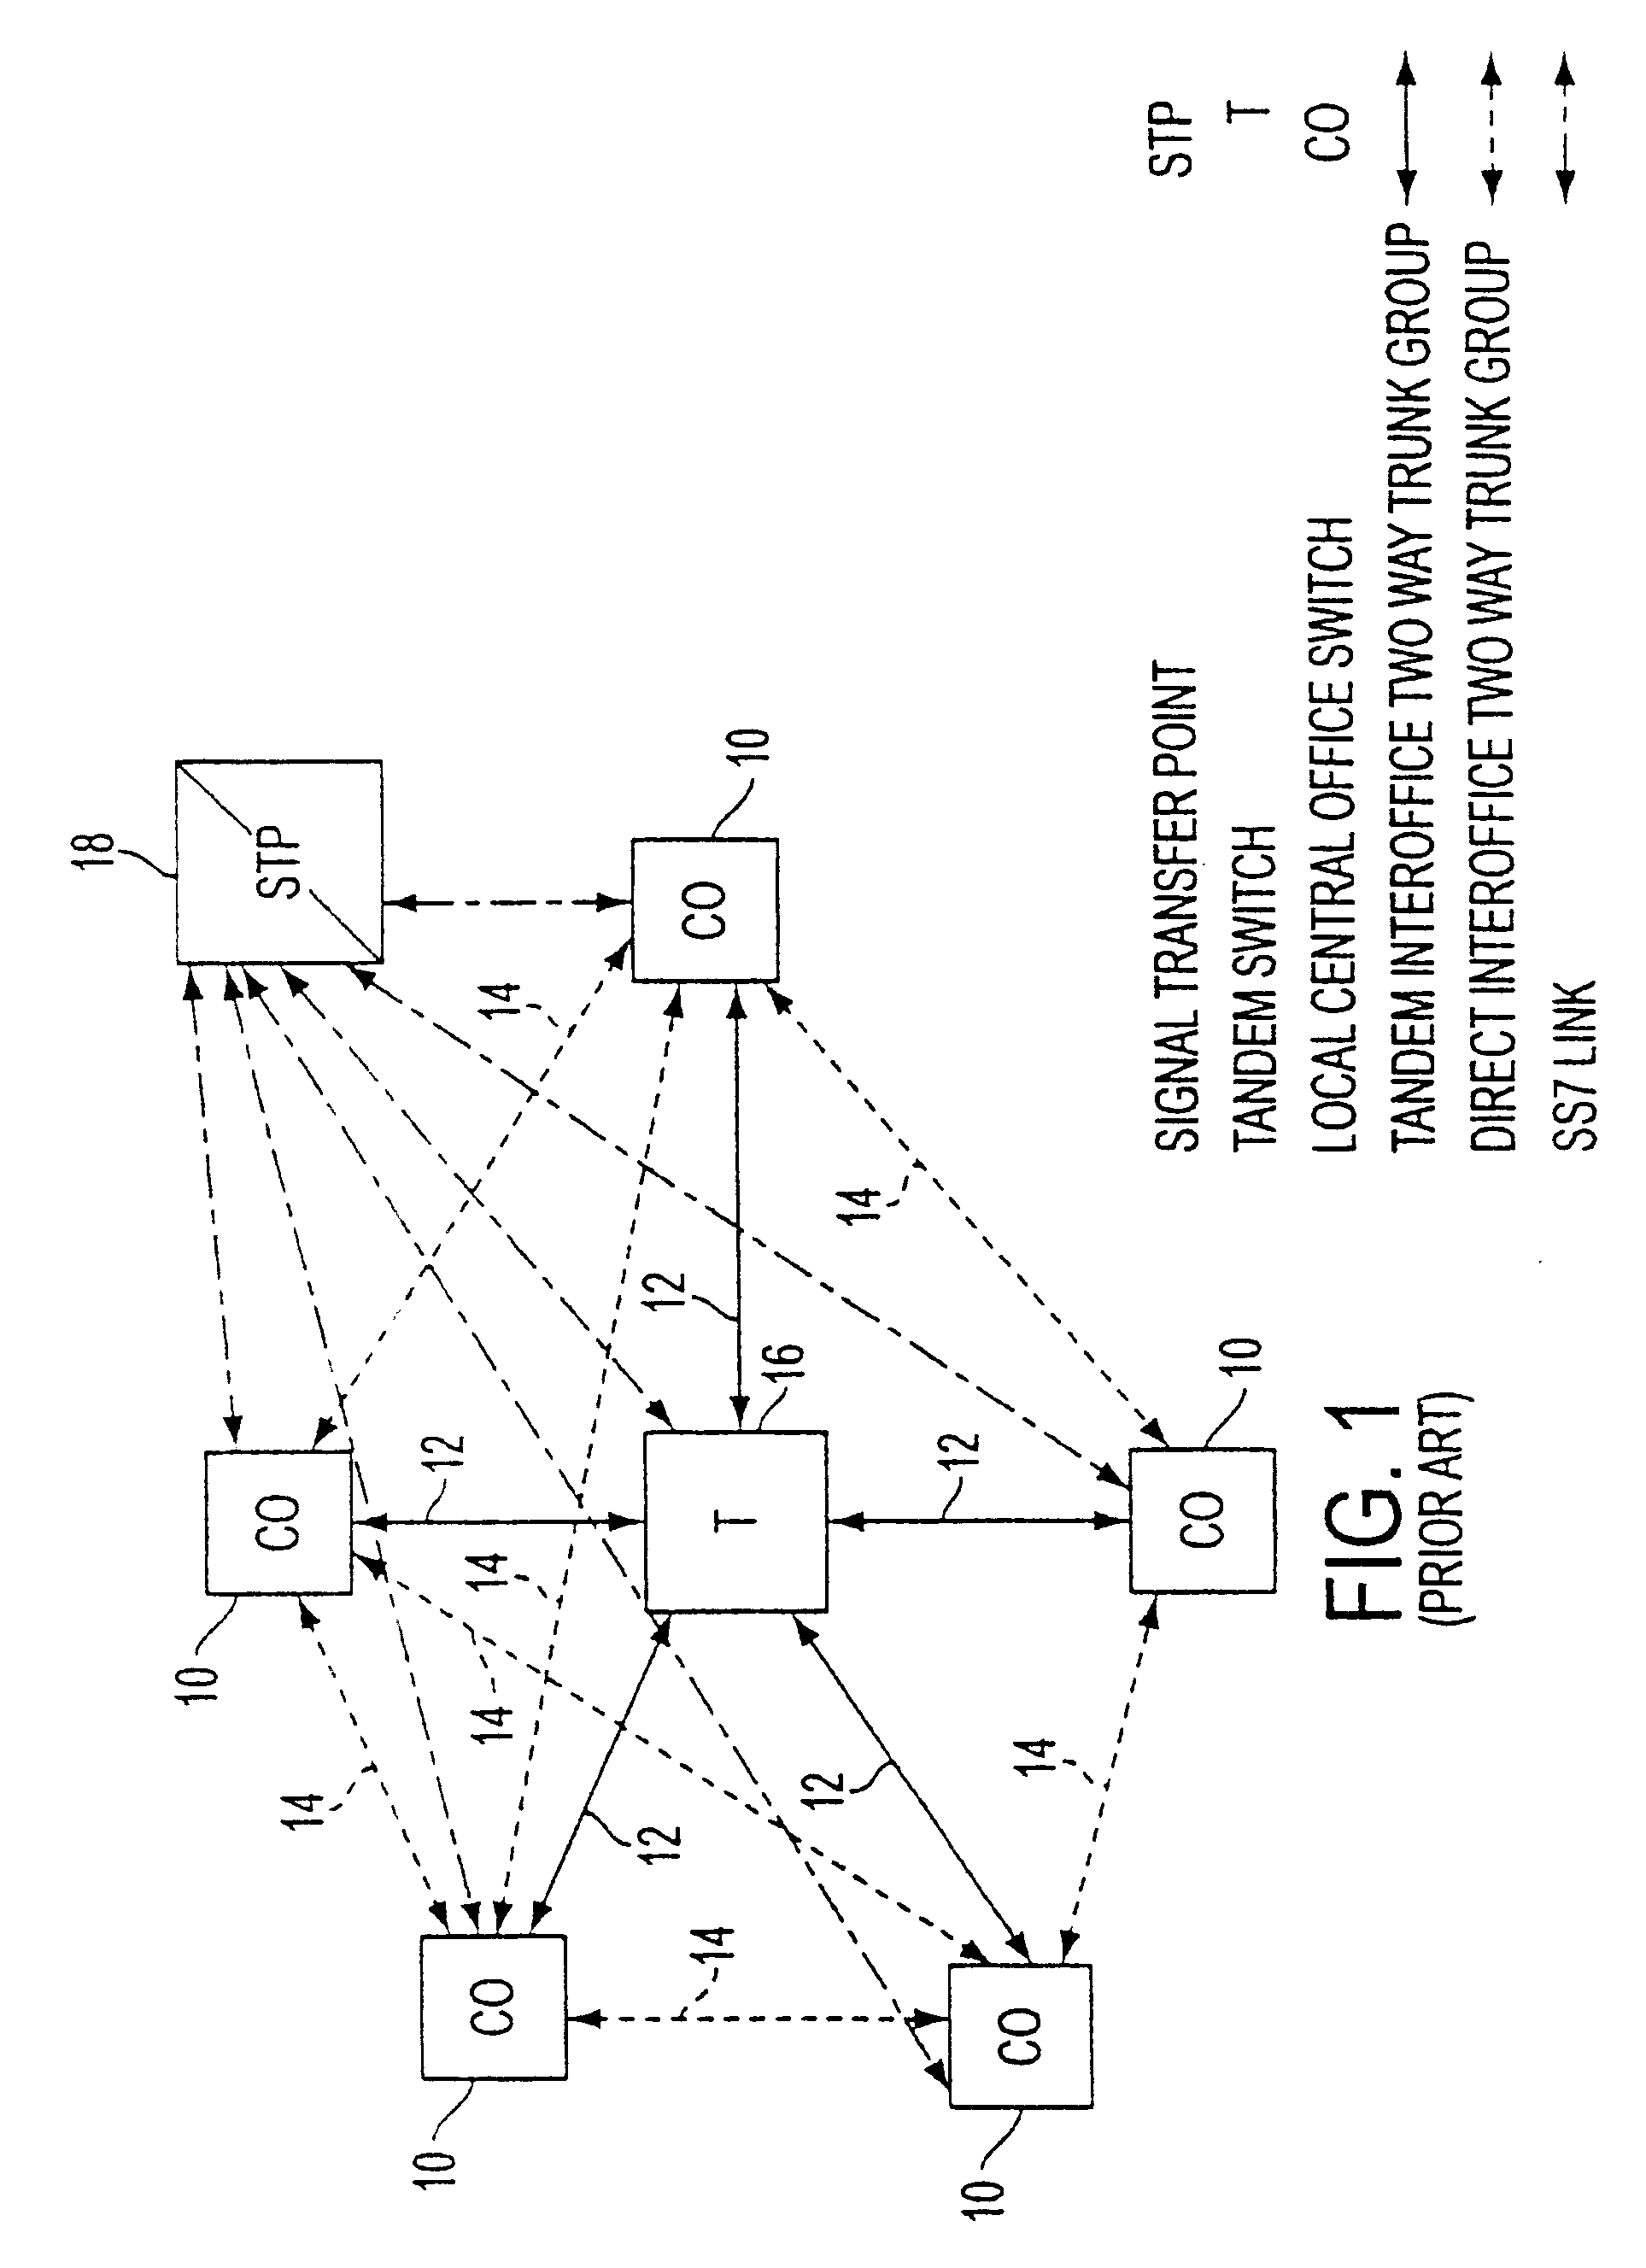 ATM-based distributed virtual tandem switching system